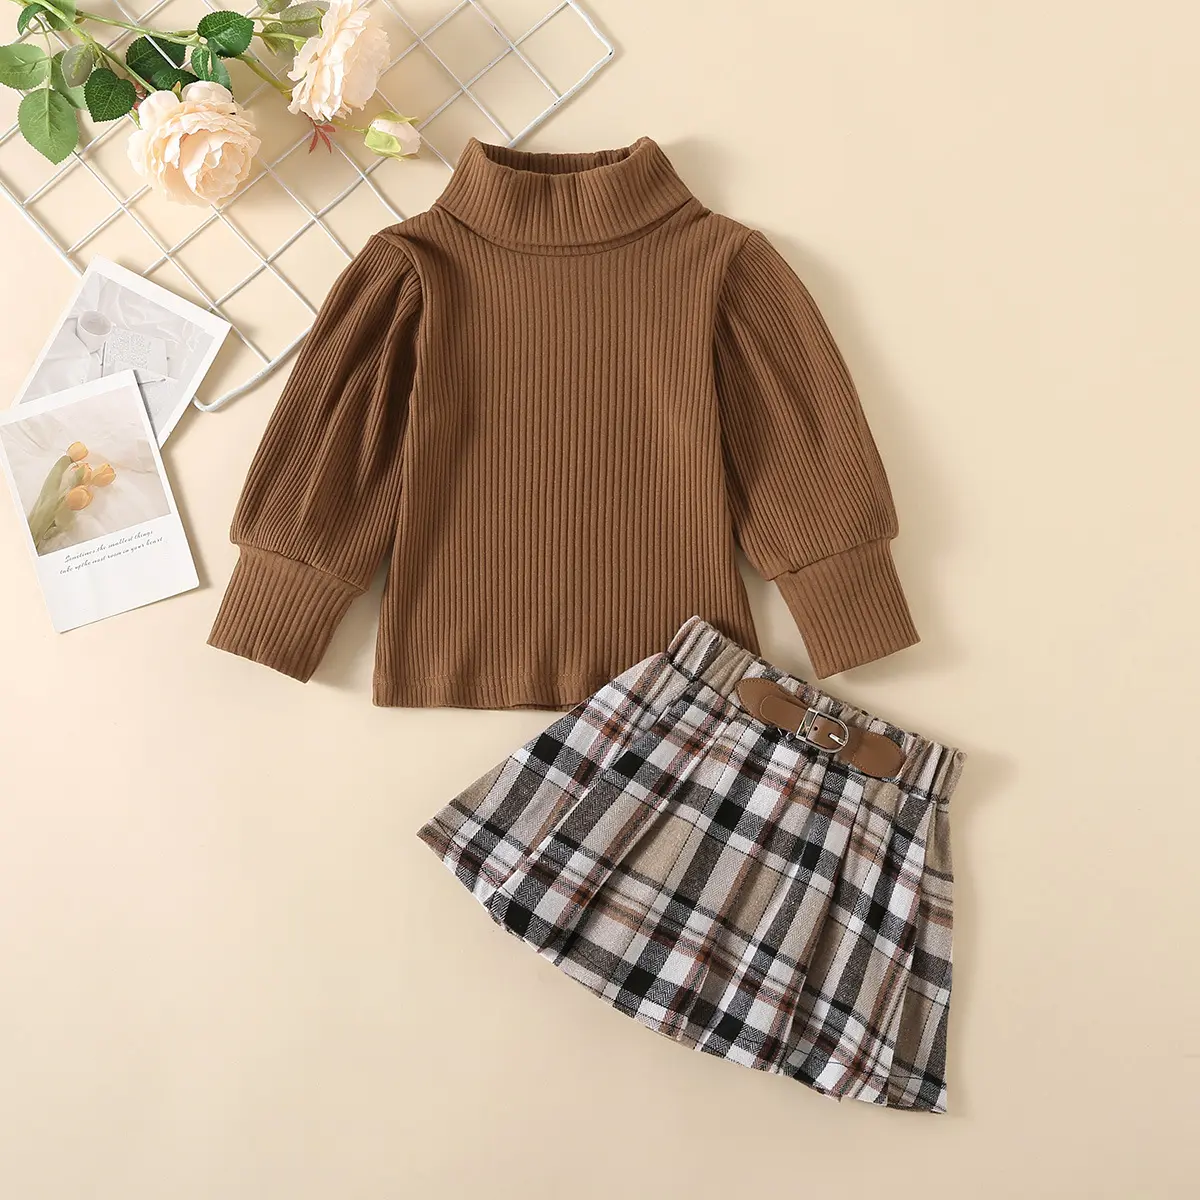 Girls Fashion Clothes 2 Pieces Suit Kids Solid Color Sweater Tops Plaid Skirt Baby Girls Clothing Sets